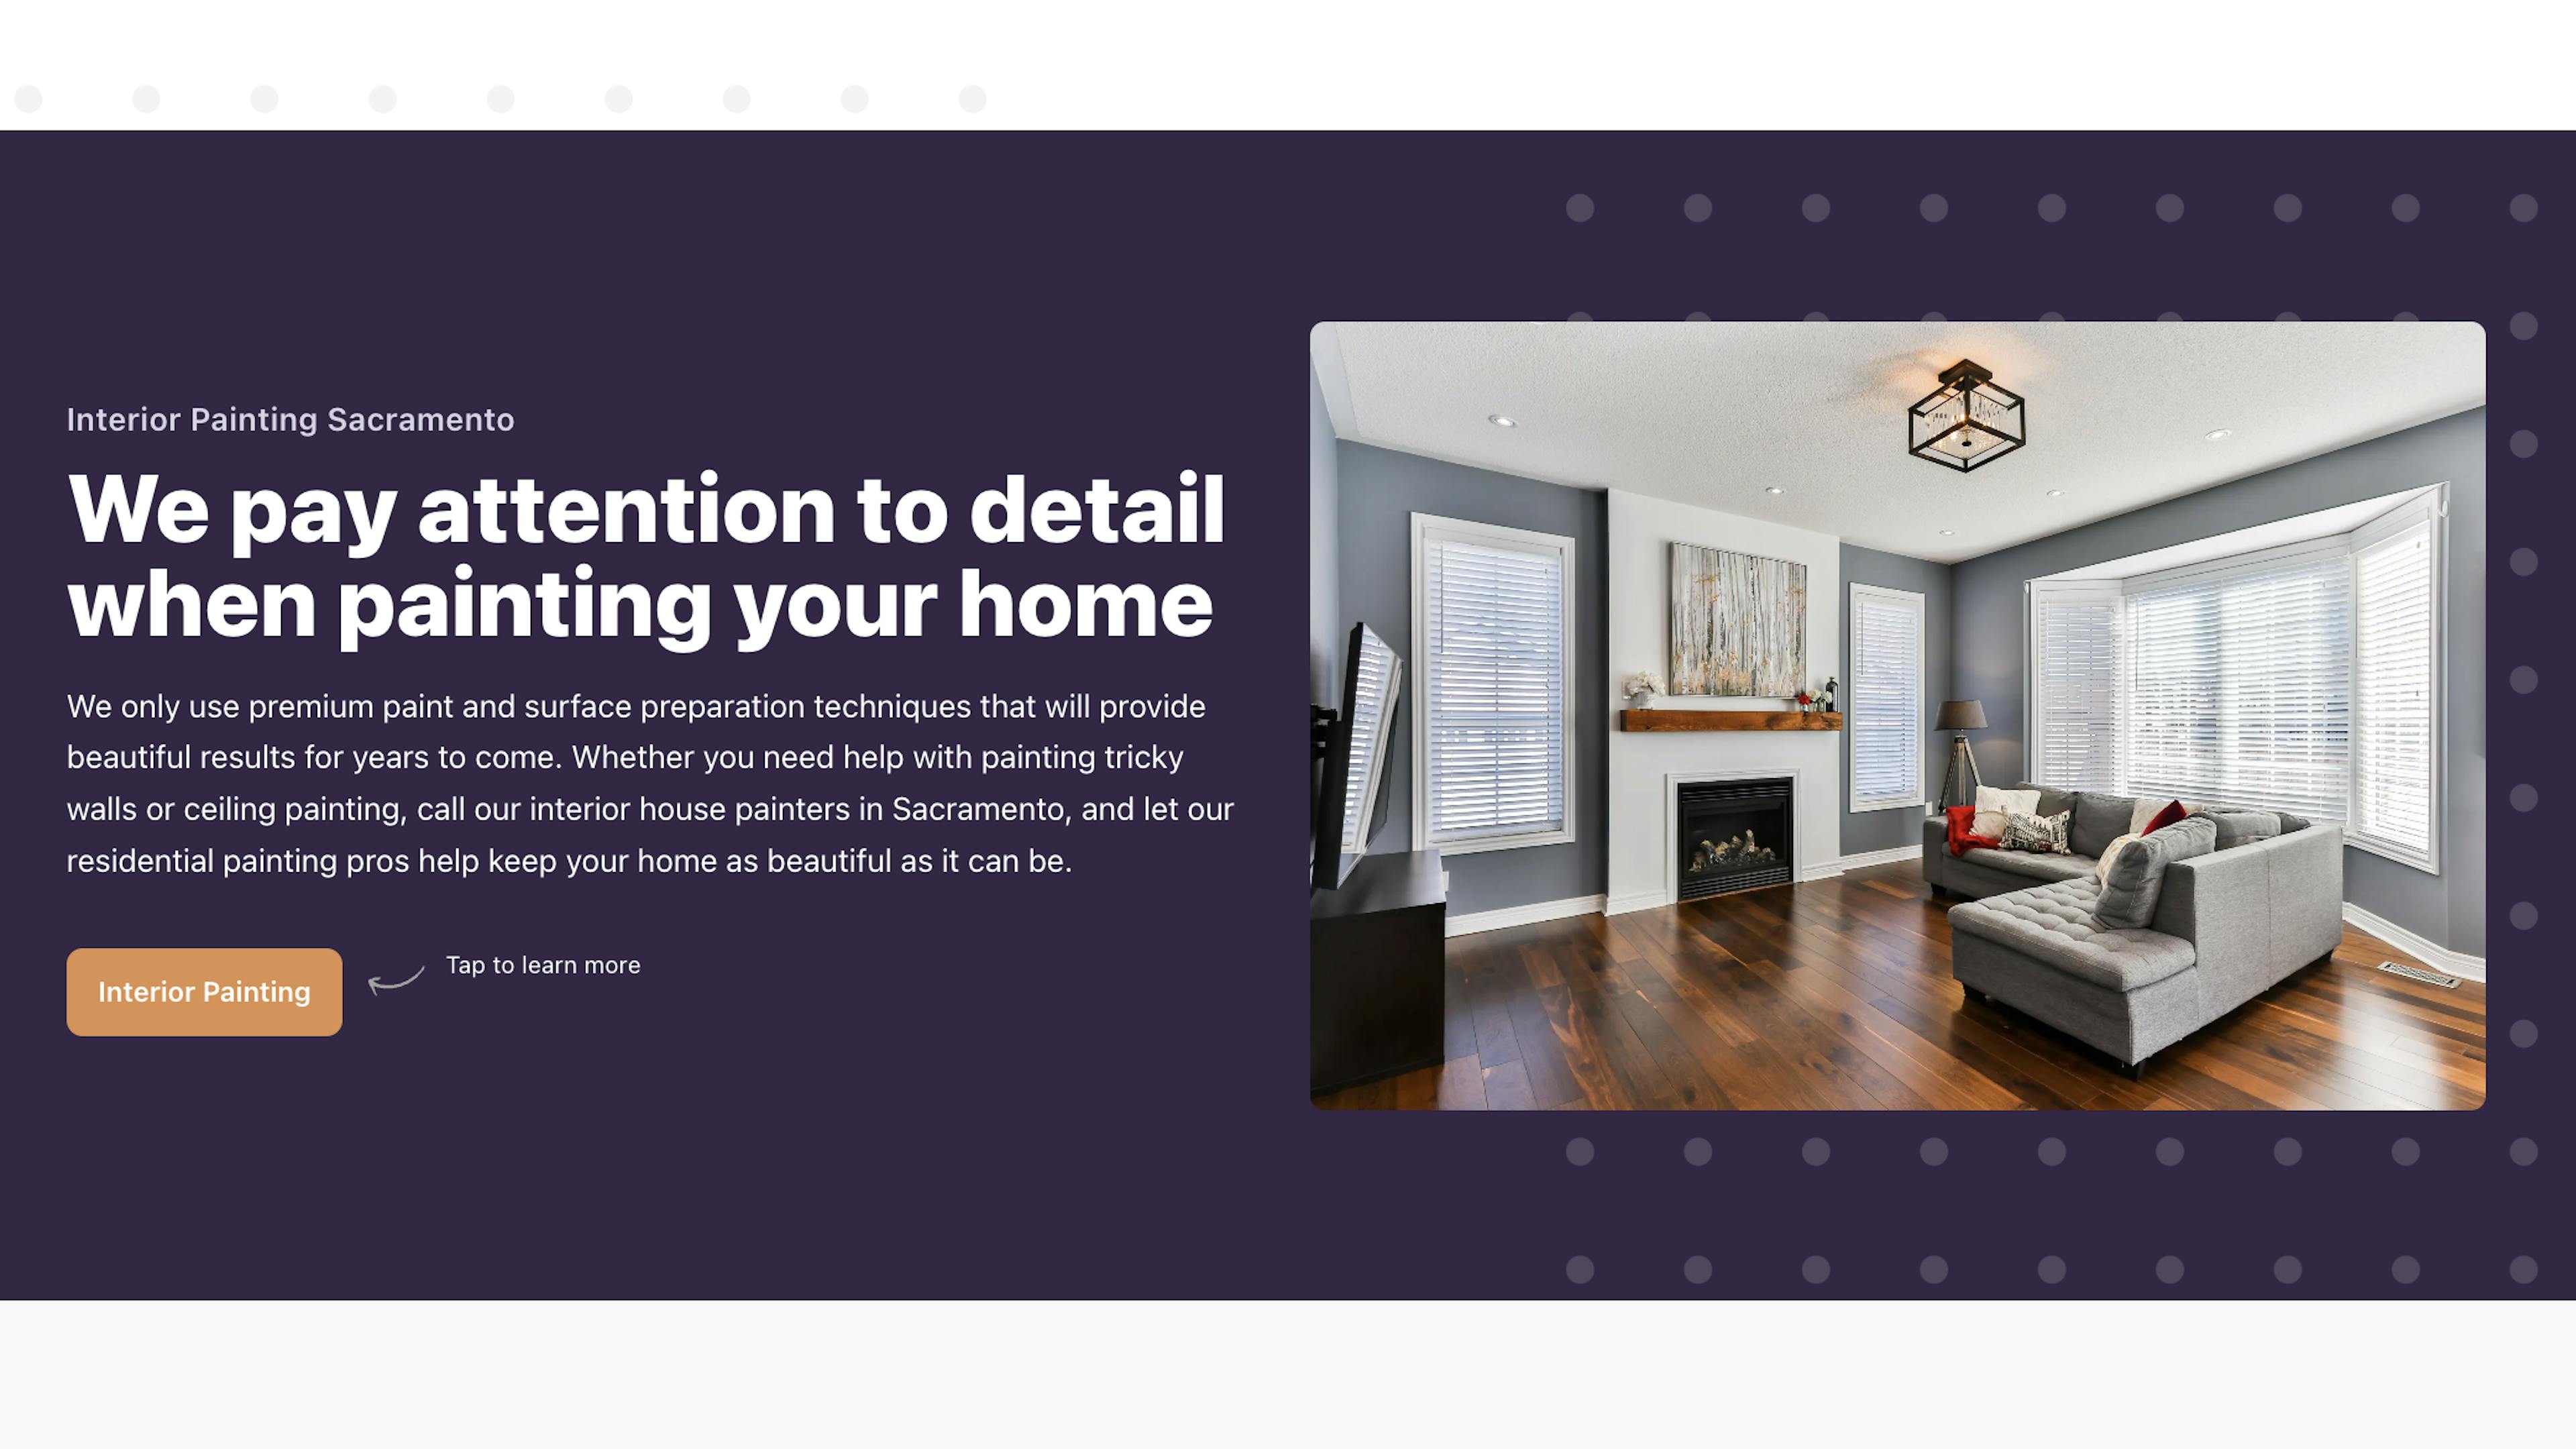 Webpage section from 'Interior Painting Sacramento' highlighting their detail-oriented painting services. The page features a bold headline, descriptive text about using premium paint, and an inviting call to action button for 'Interior Painting'. The accompanying image shows a neatly painted living room with a gray sofa, wooden floors, and white blinds, embodying the quality workmanship offered.